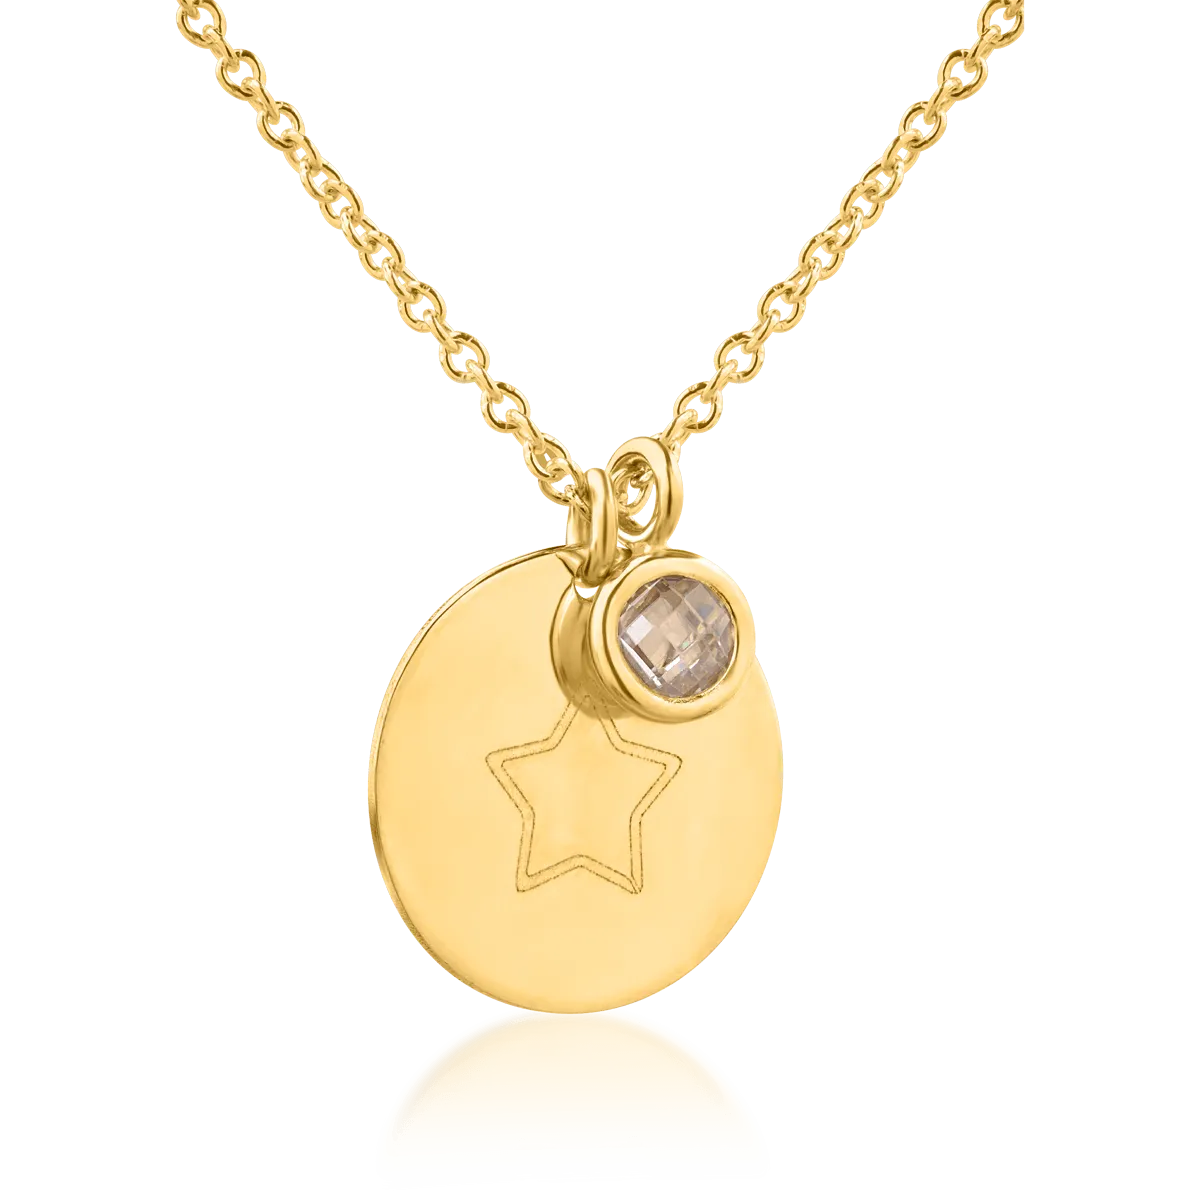 14K yellow gold penny pendant and charm necklace